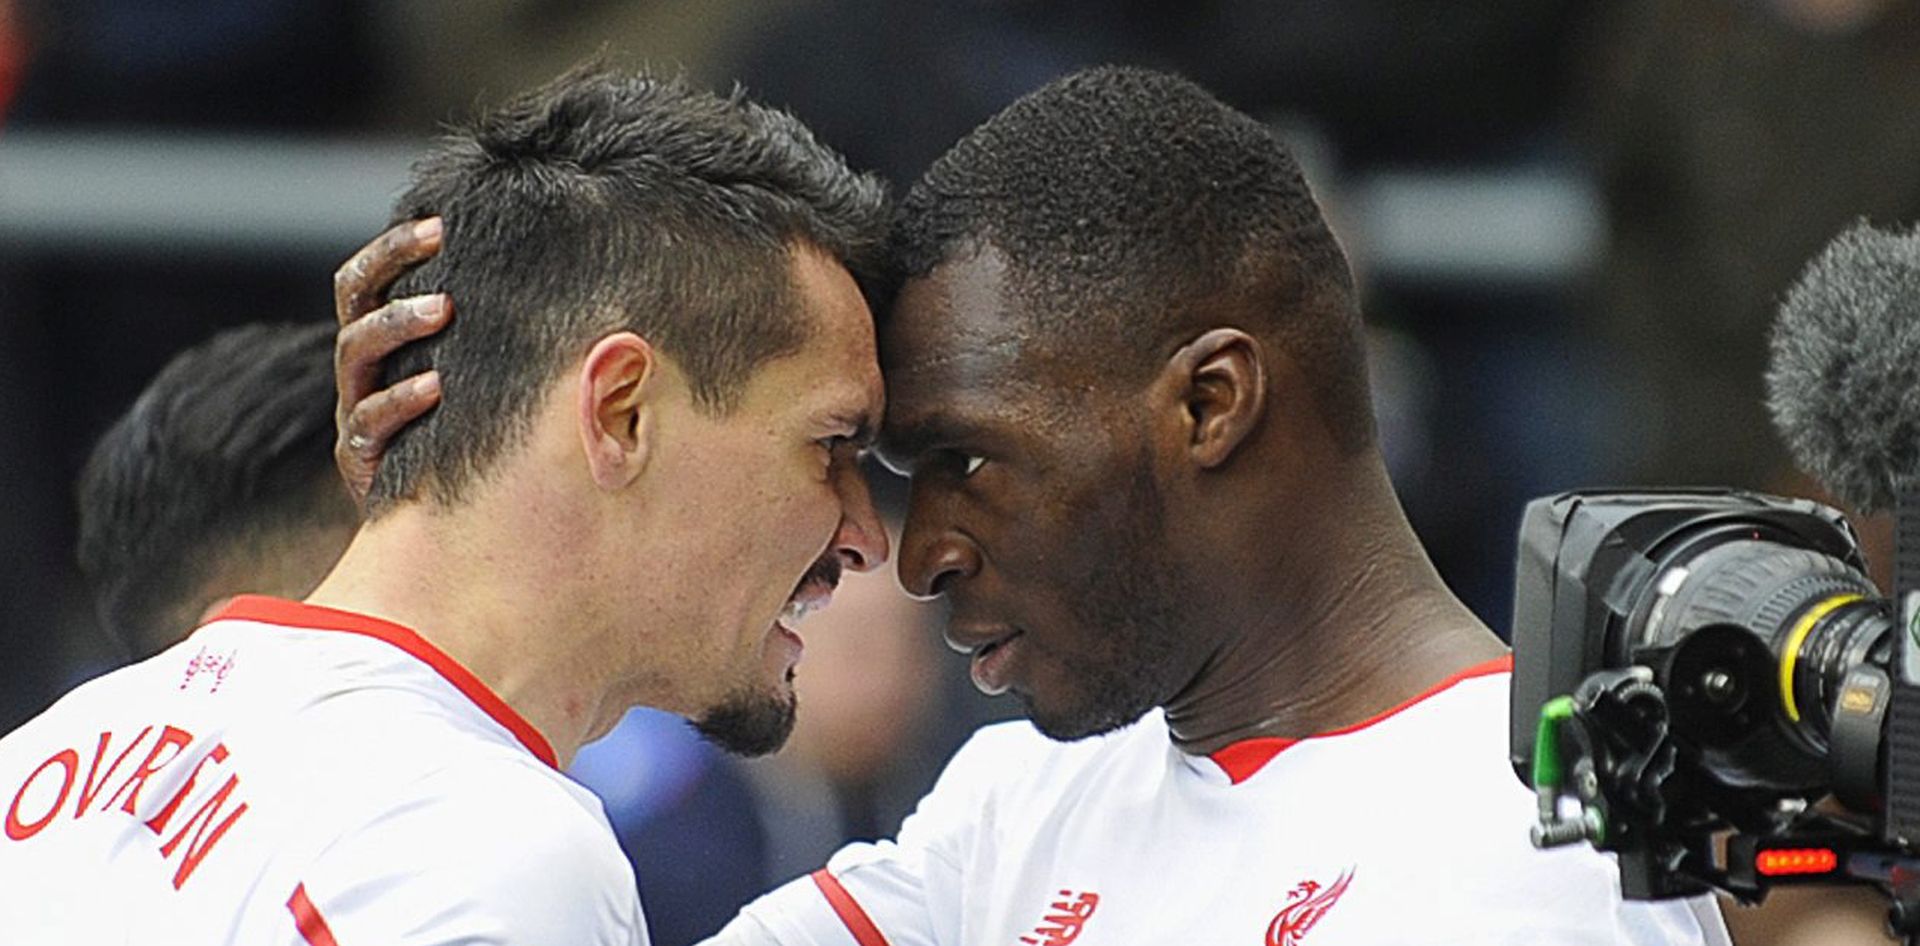 epa05198188 Liverpool players Dejan Lovren (L) and Christian Benteke (R) celebrate after the English Premier League soccer match between Crystal Palace and Liverpool FC in London, Britain, 06 March 2016. Liverpool won 2-1.  EPA/GERRY PENNY   EDITORIAL USE ONLY. No use with unauthorized audio, video, data, fixture lists, club/league logos or 'live' services. Online in-match use limited to 75 images, no video emulation. No use in betting, games or single club/league/player publications.